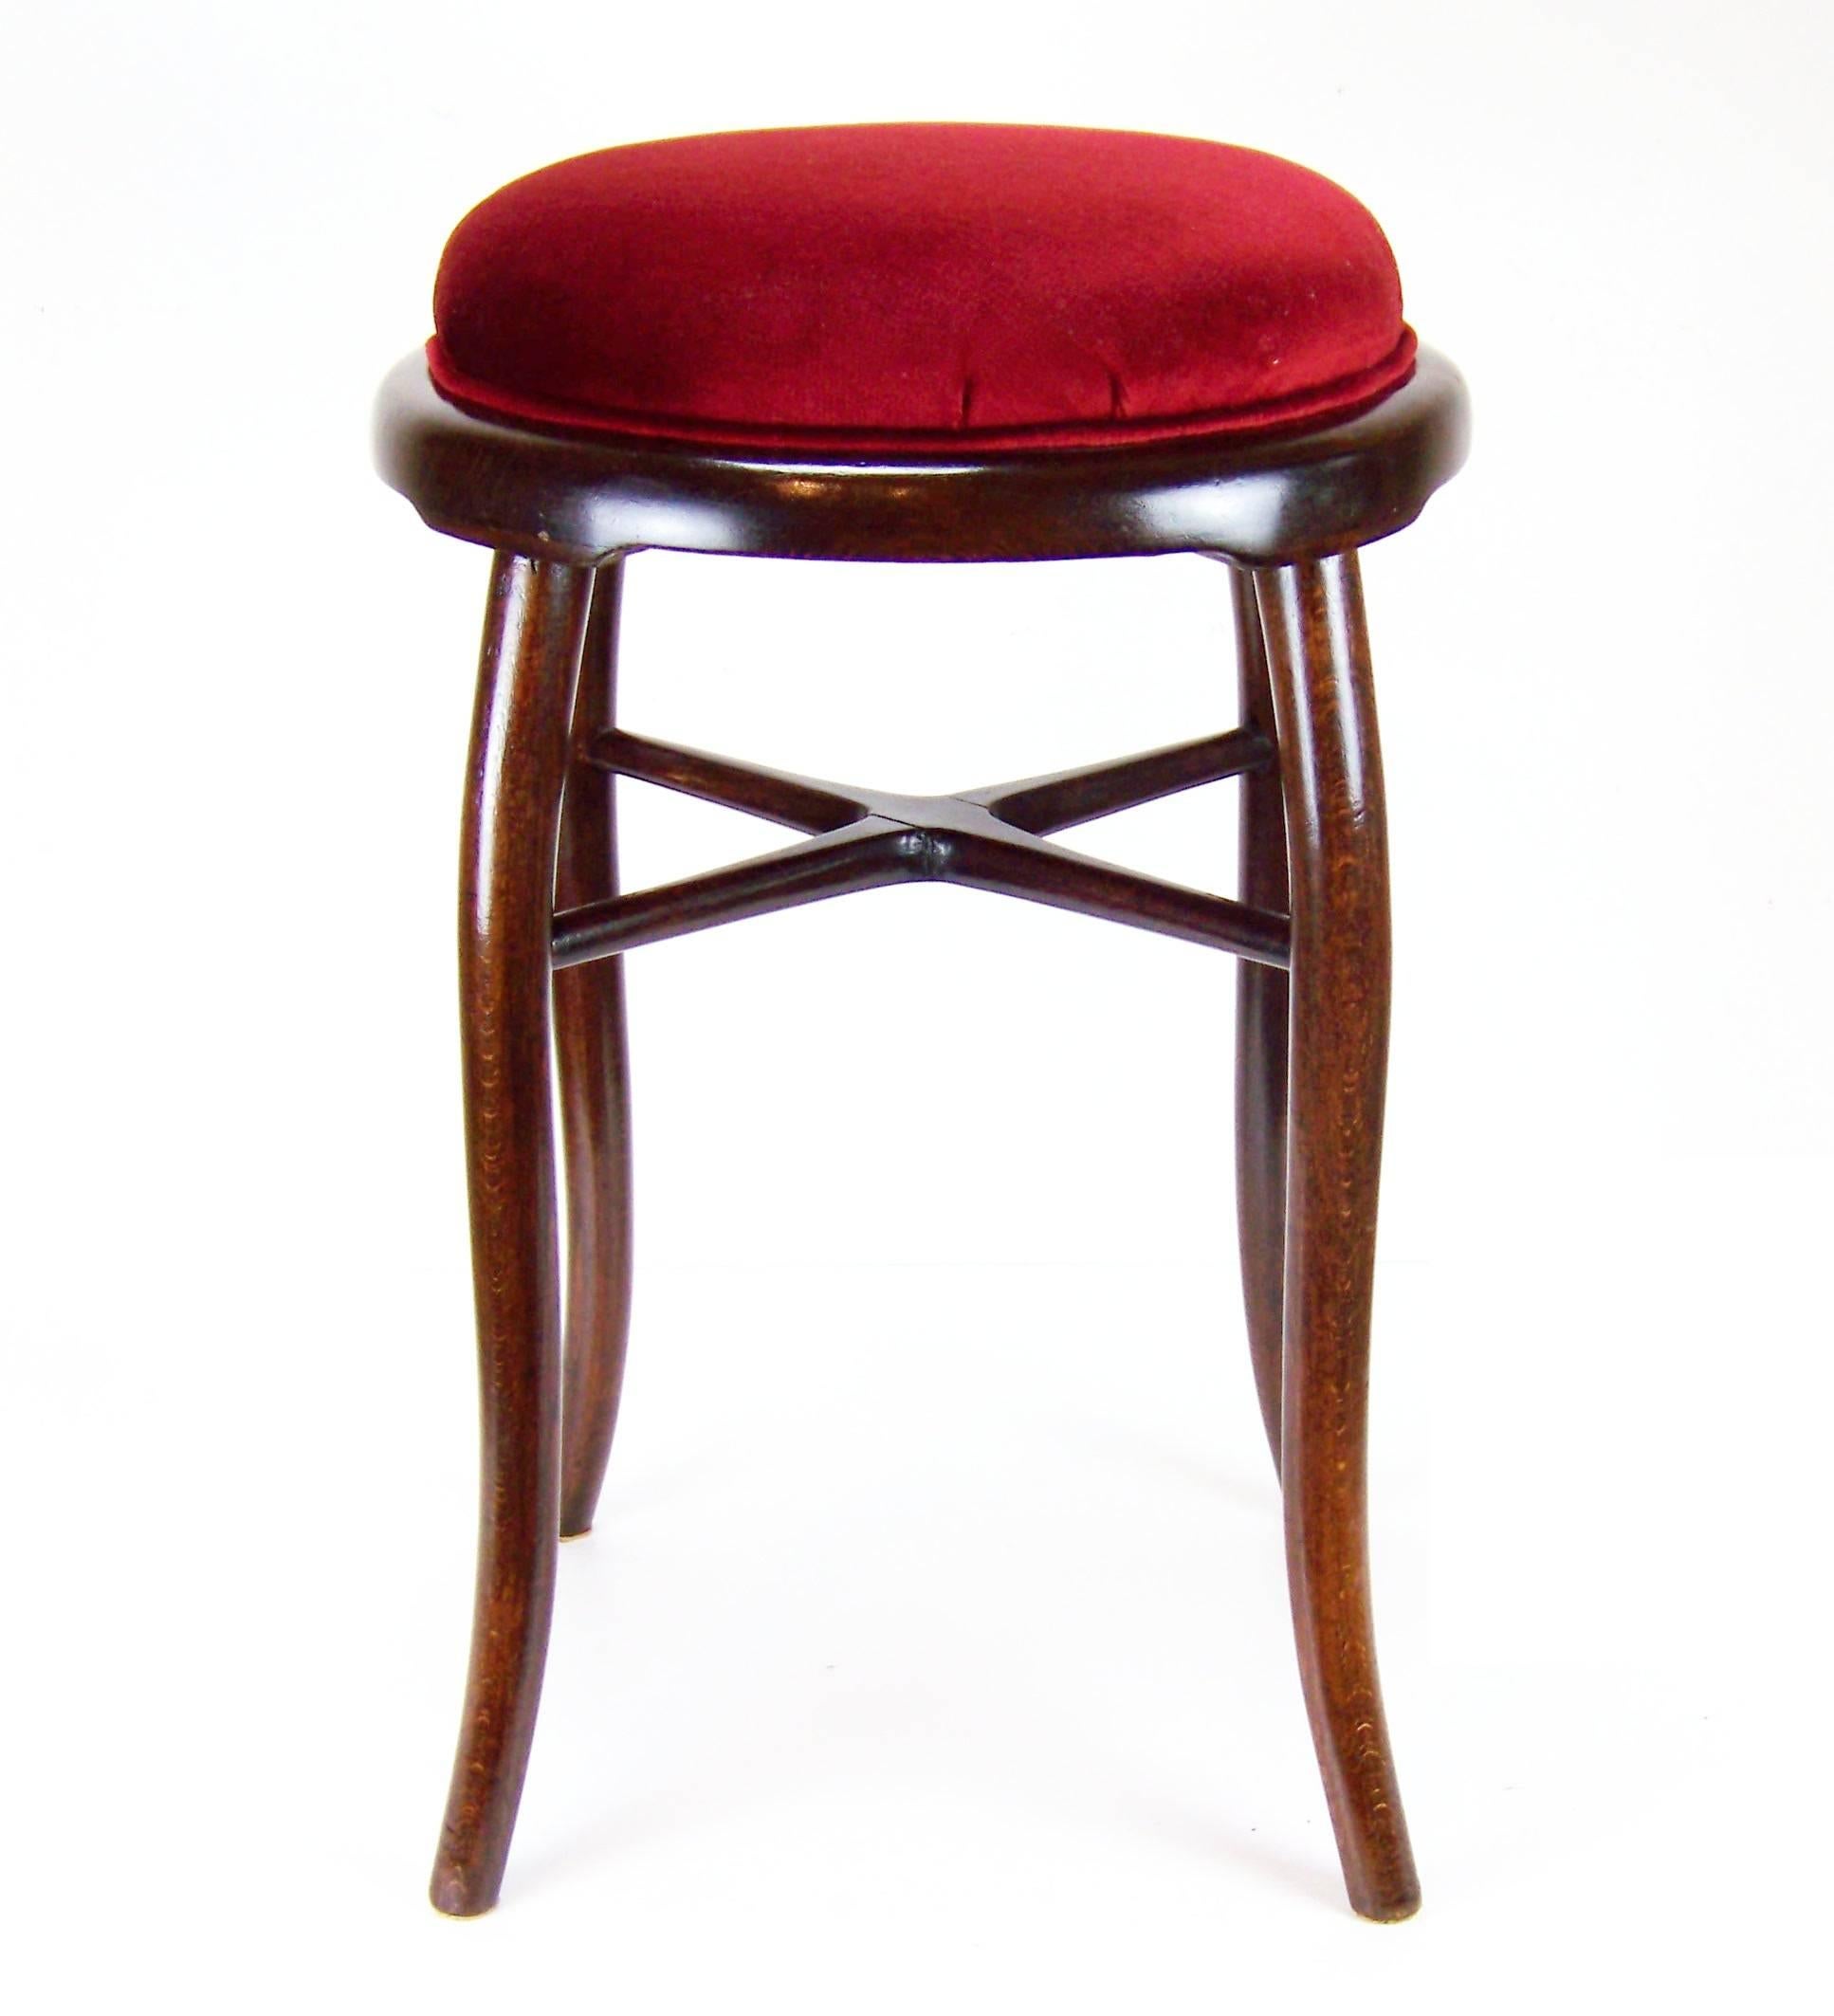 Stool from a Viennese competitor, which copied Gebrüder Thonet products in years 1847-1878. Newly restored.